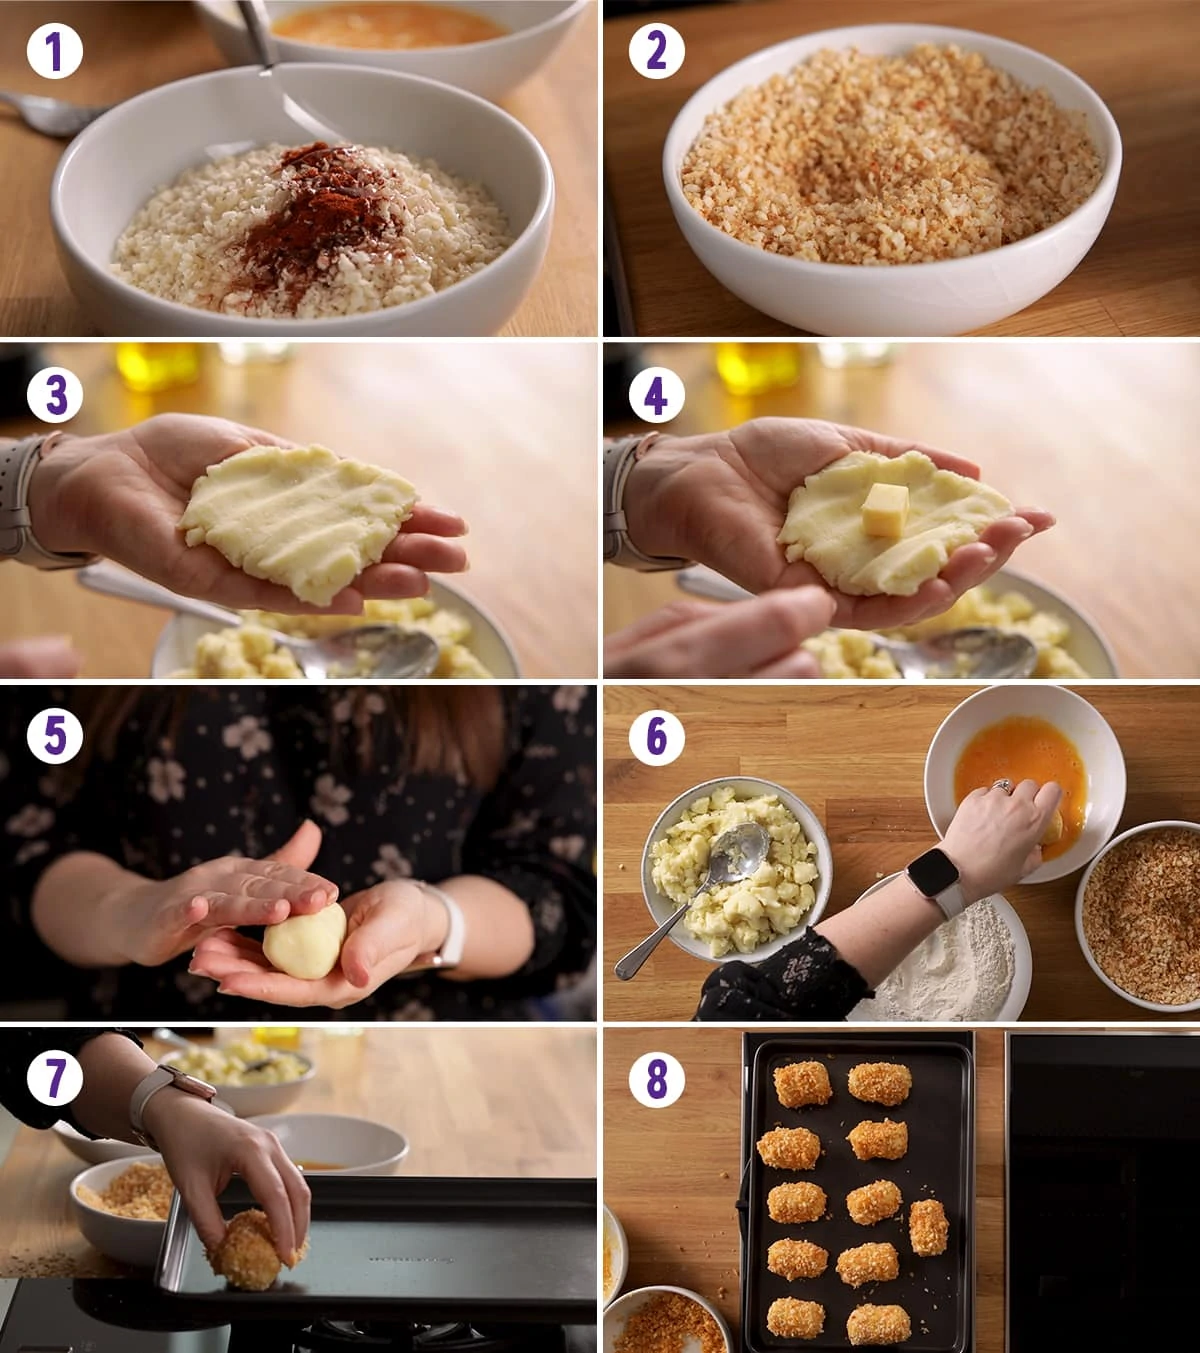 8 image collage showing how to make potato croquettes 